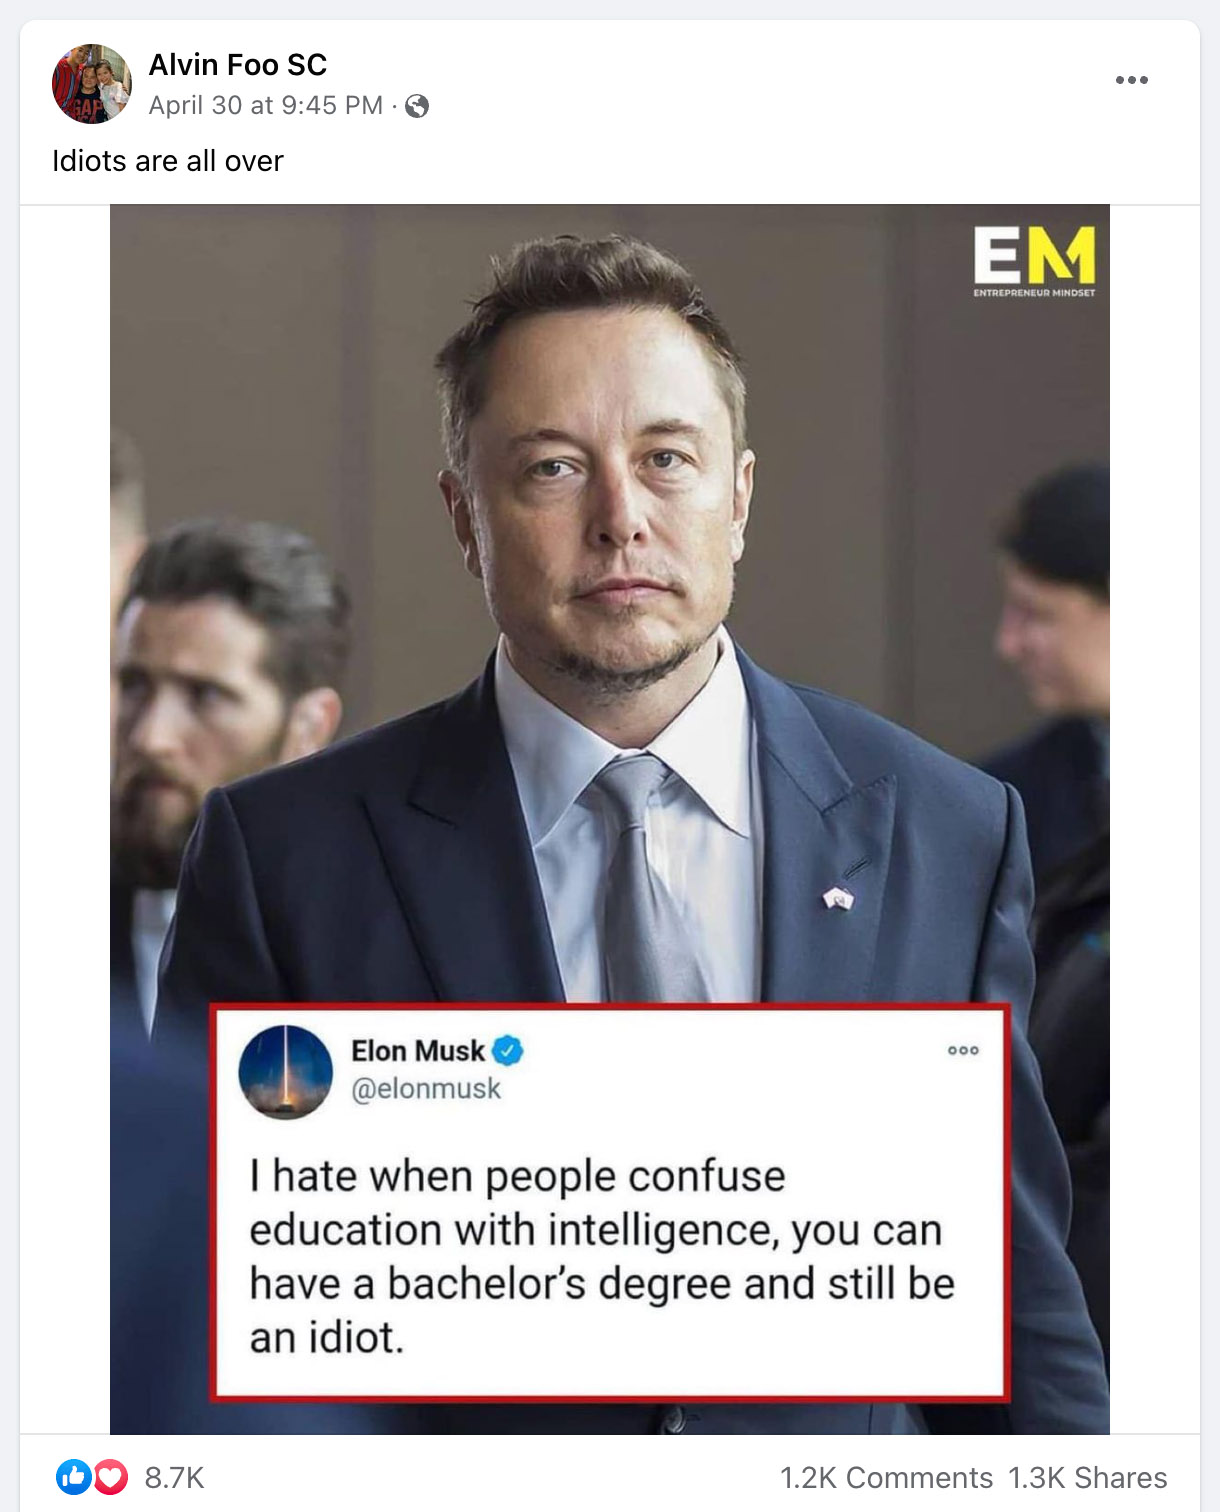 There's no record that Elon Musk said the words in the quote I hate when people confuse education with intelligence or you can have a bachelor's degree and still be an idiot.